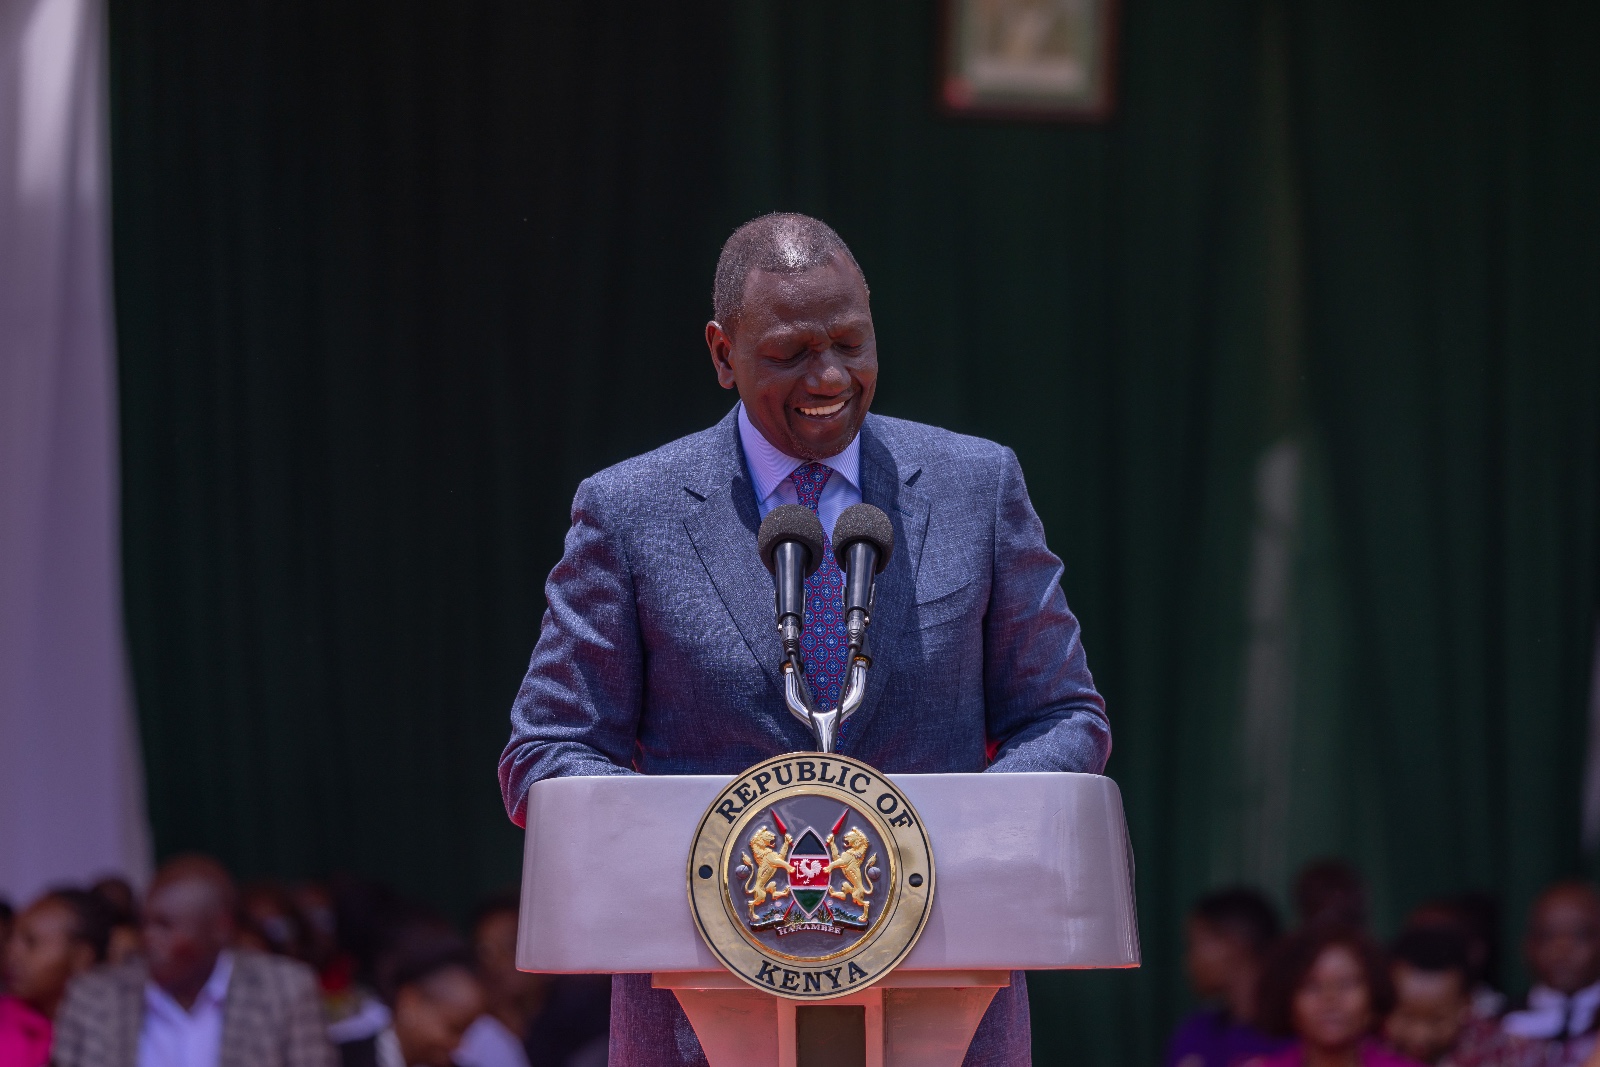 Ruto Appoints 16 Female Ambassadors on Women’s Day